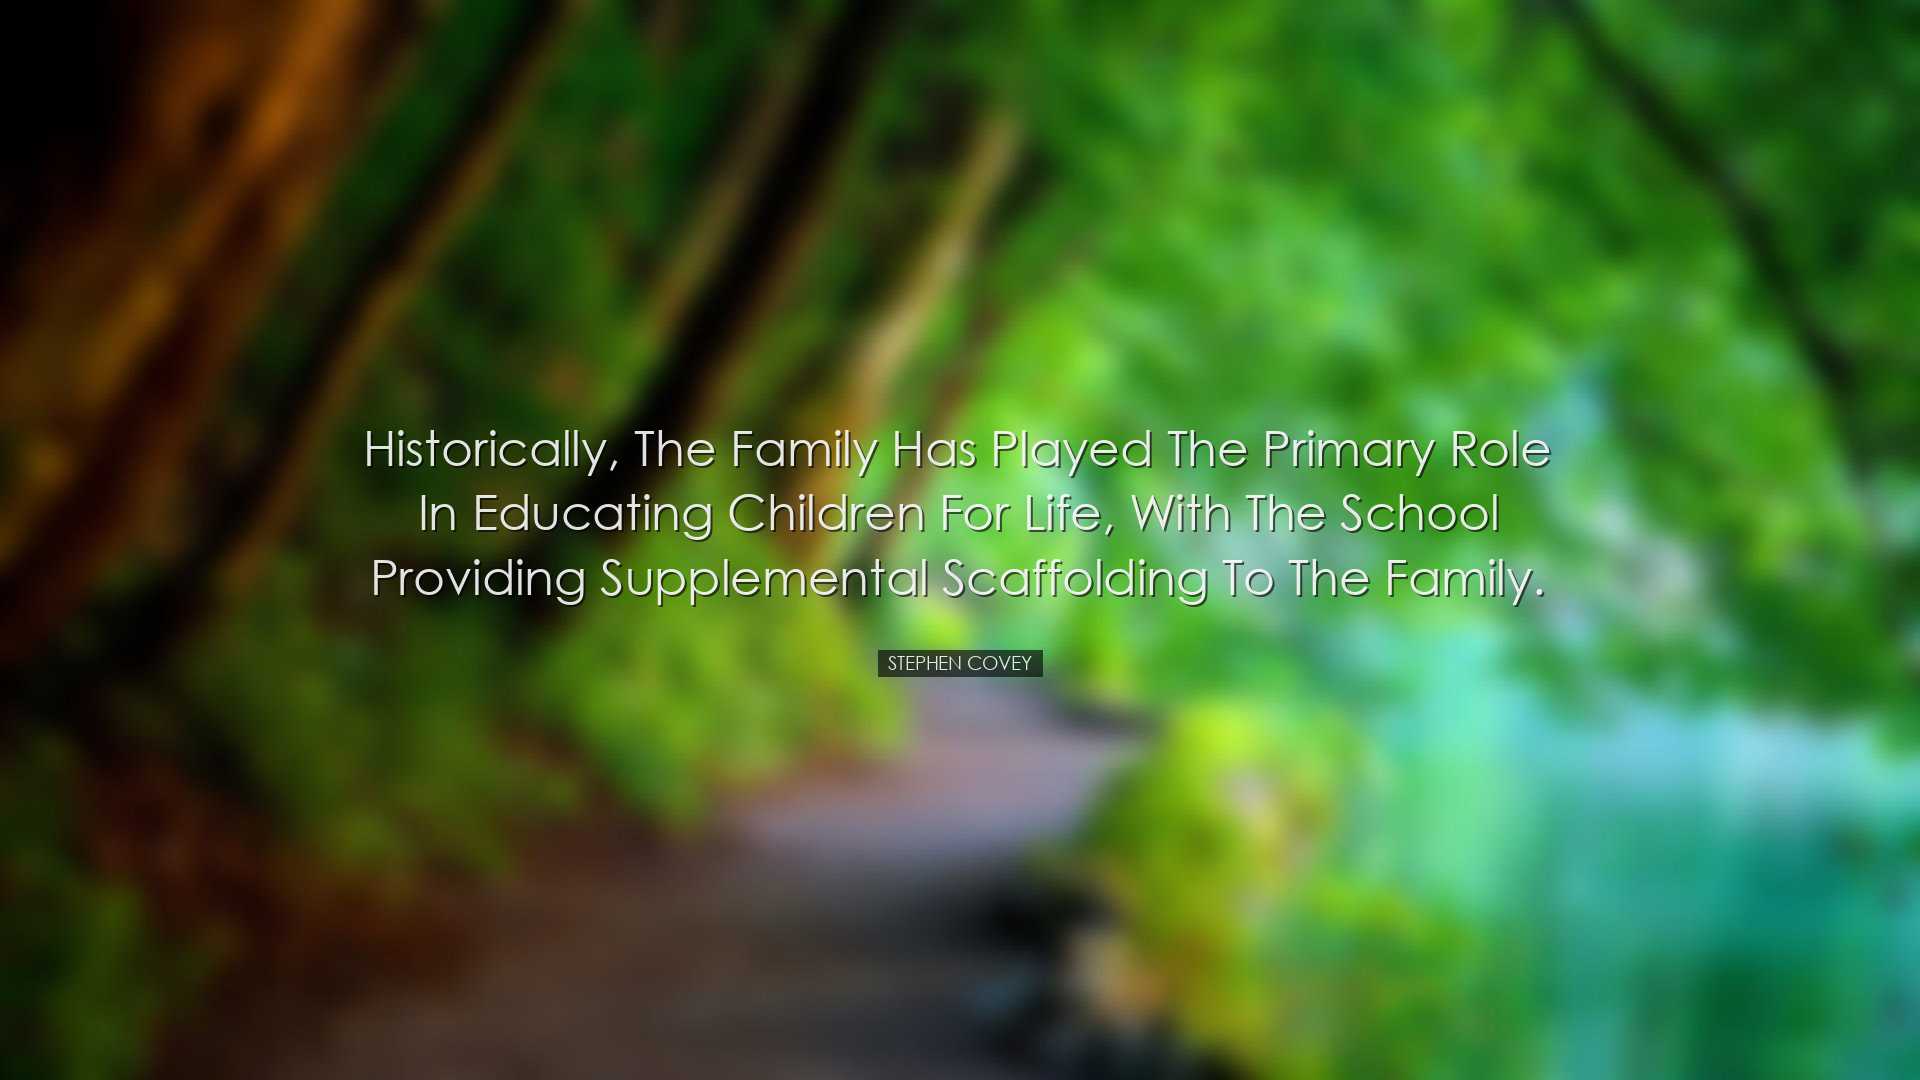 Historically, the family has played the primary role in educating